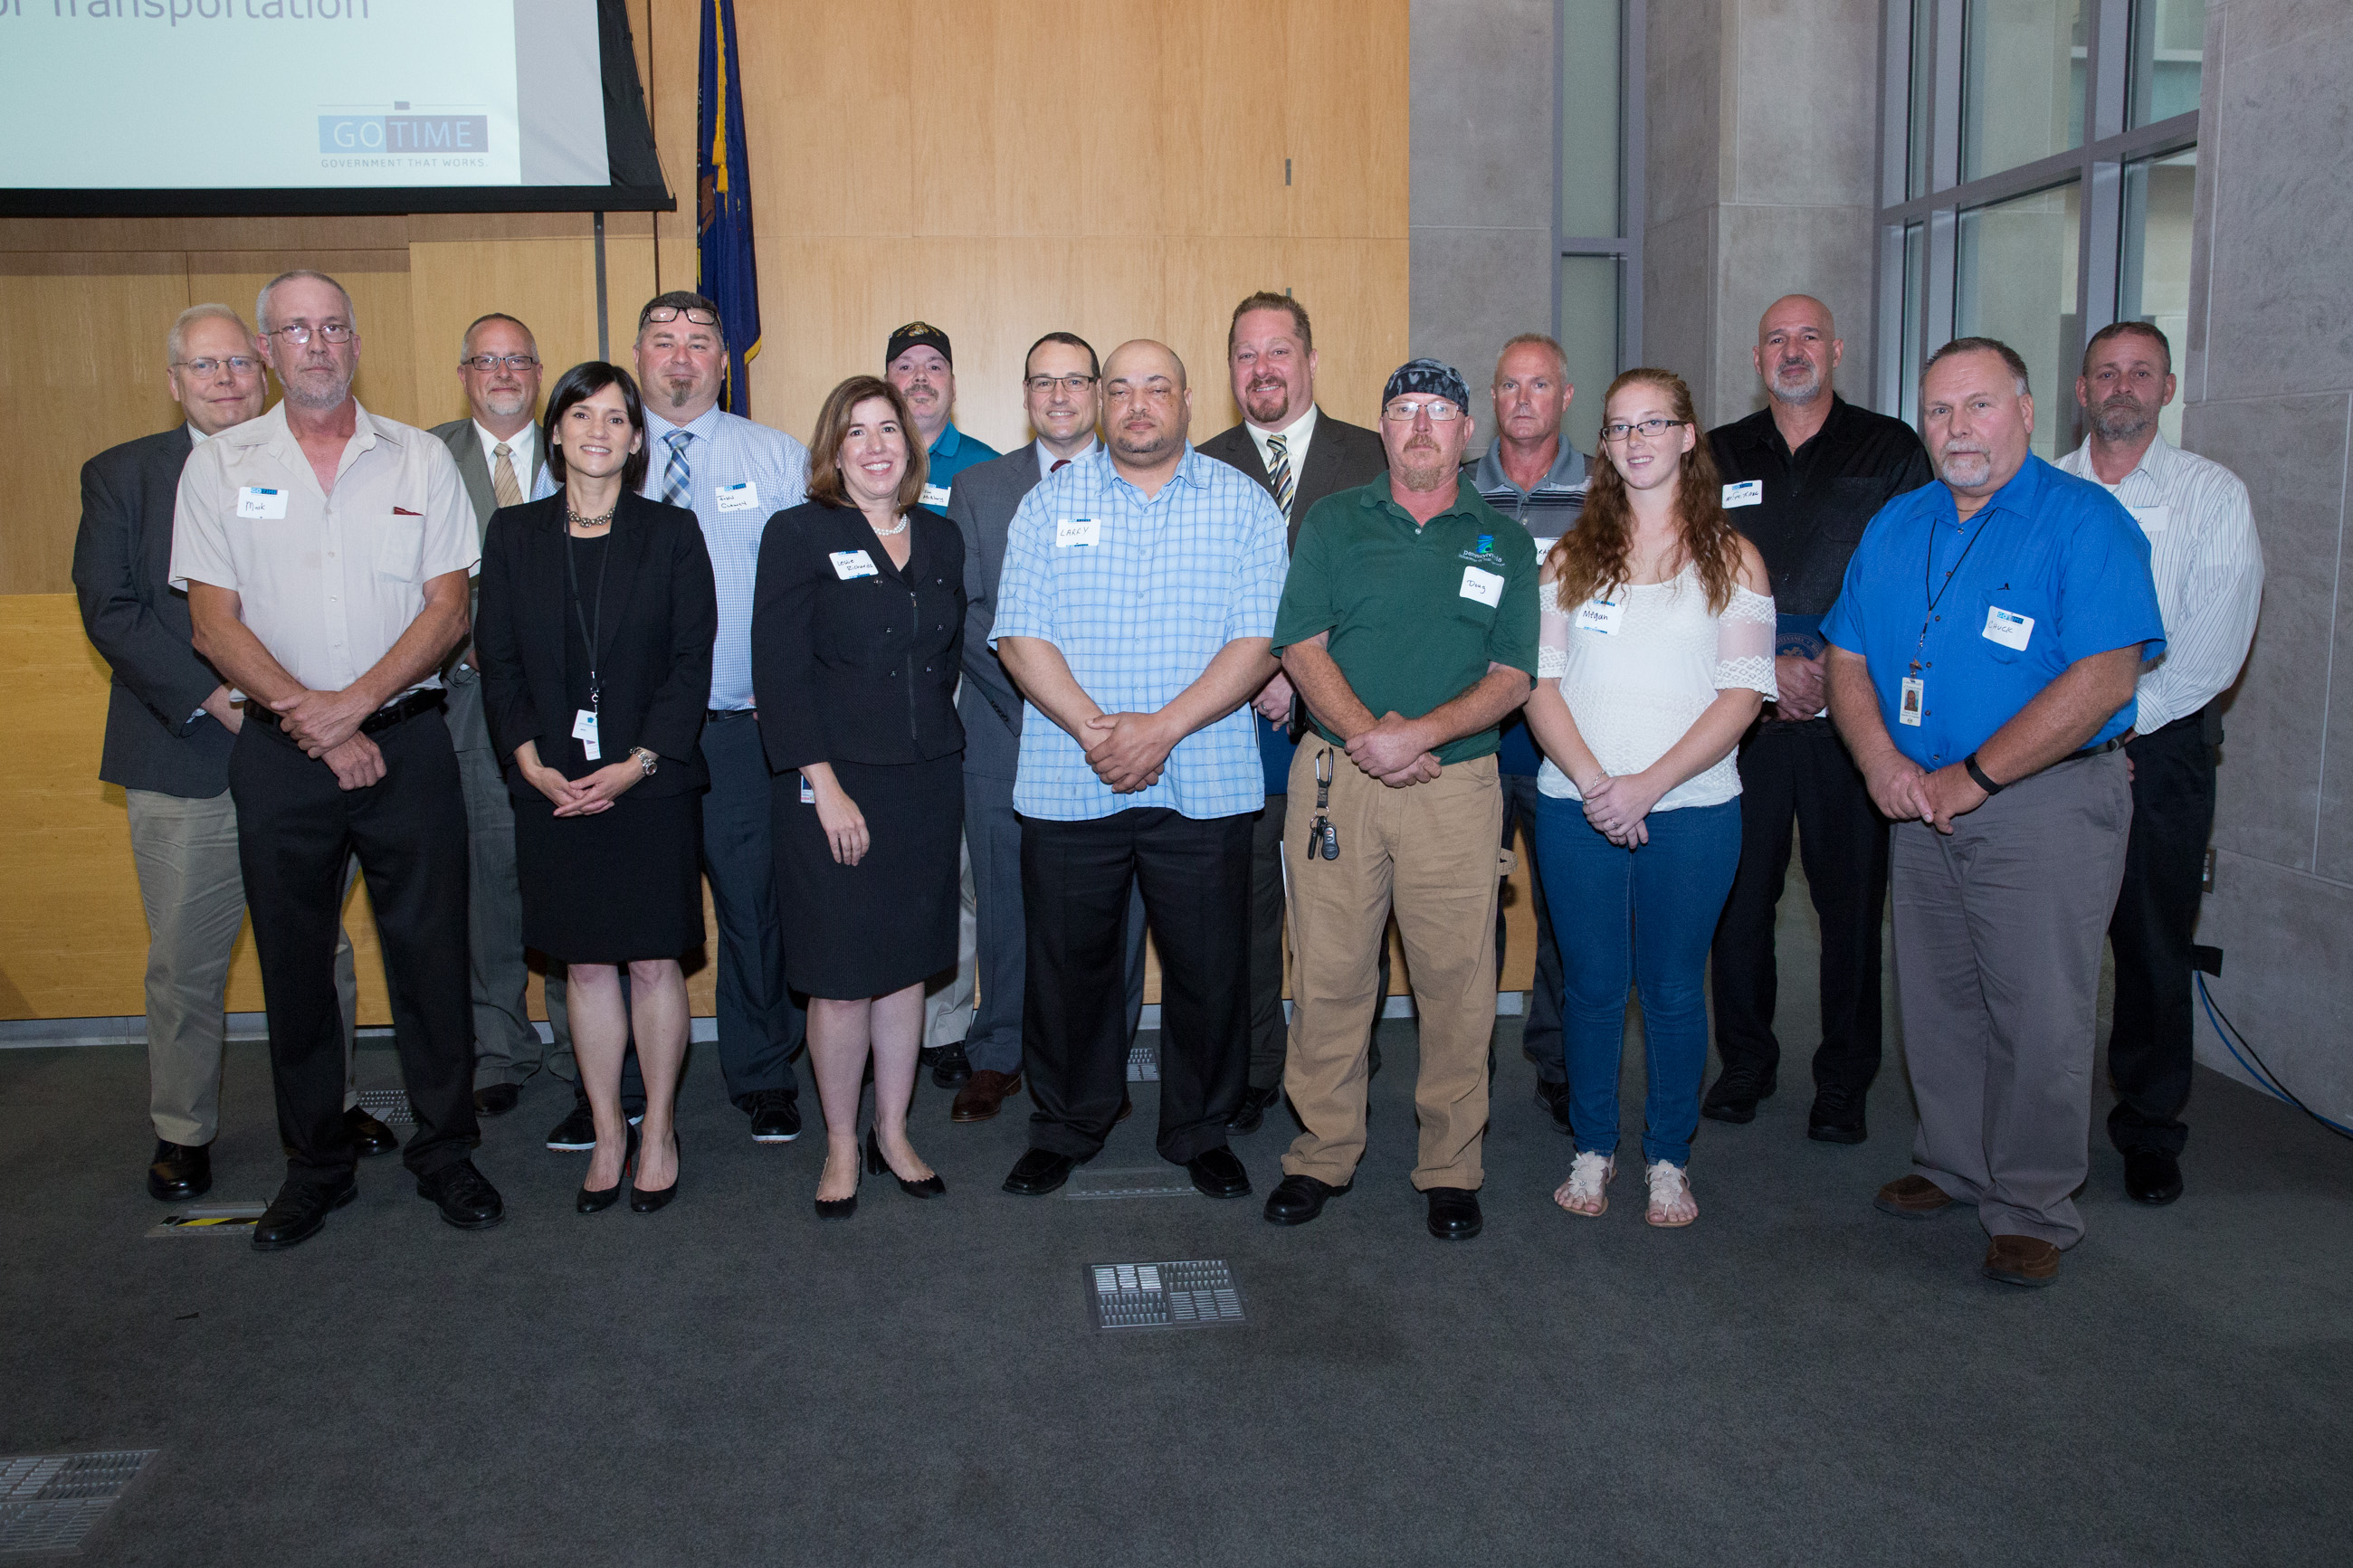 penndot crew members from montgomery county receive a go-time award for piloting dark-hour highway preservation maintenance